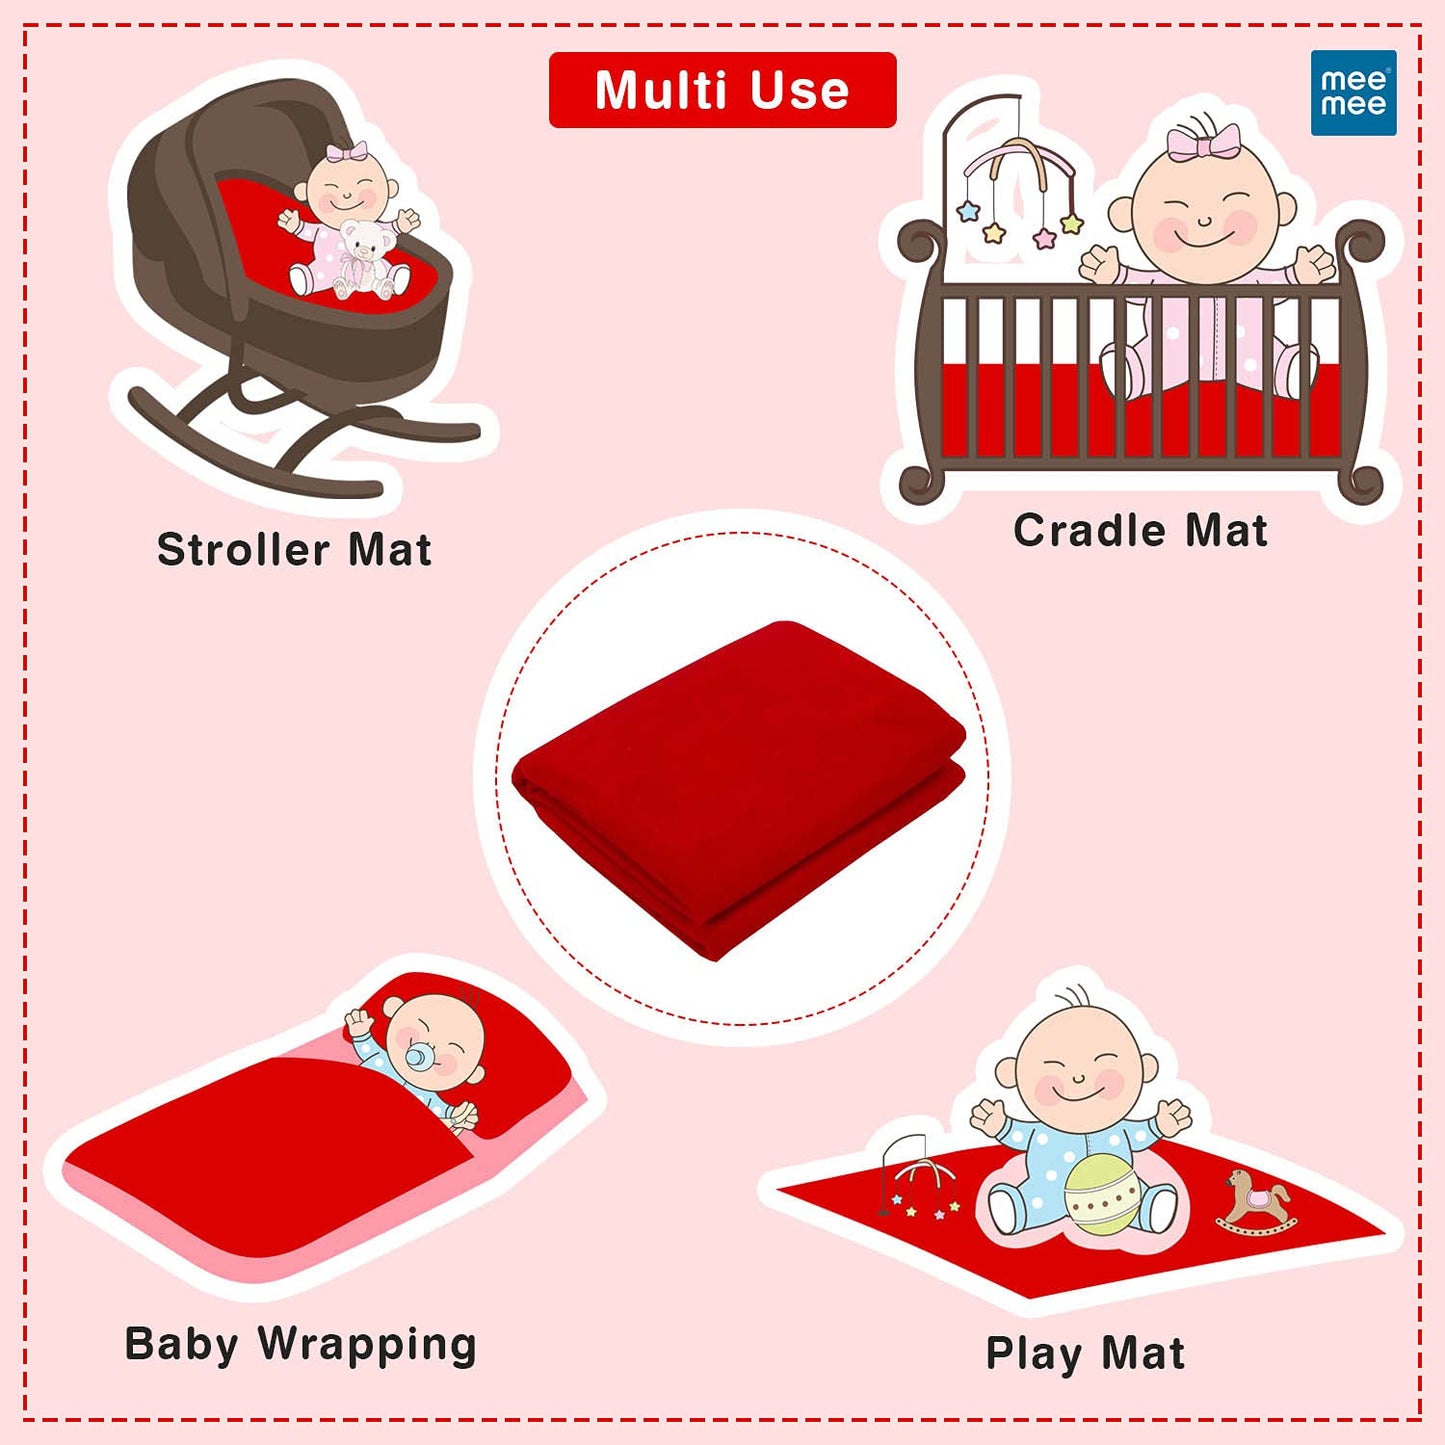 Mee Mee Reusable Water Proof/Extra Absorbent Dry Sheets(Red, Medium)